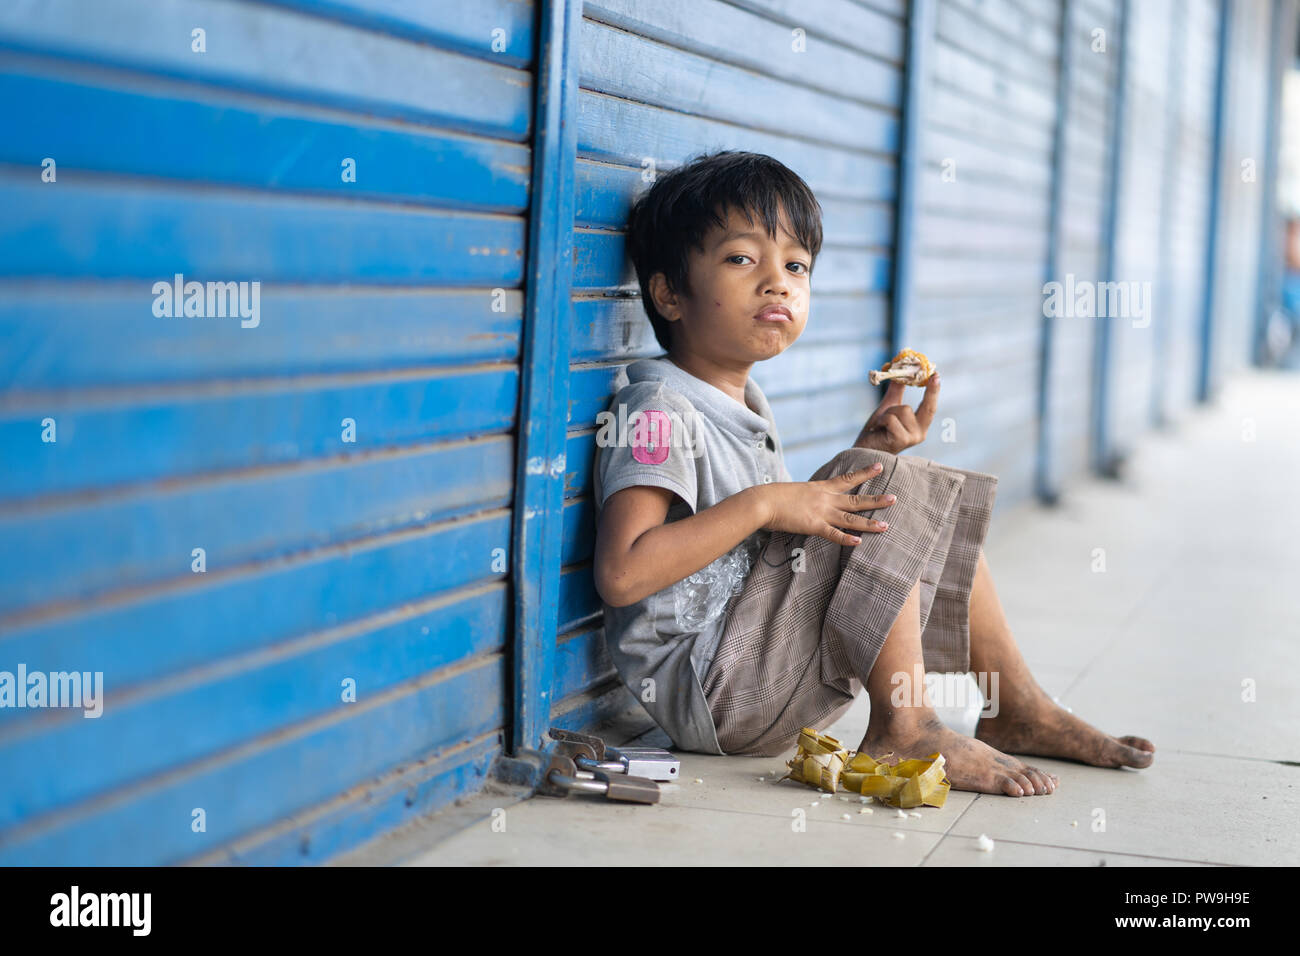 A young Filipino boy with dirty feet as a result of having no shoes eats a meal on the sidewalk,Cebu City,Philippines Stock Photo